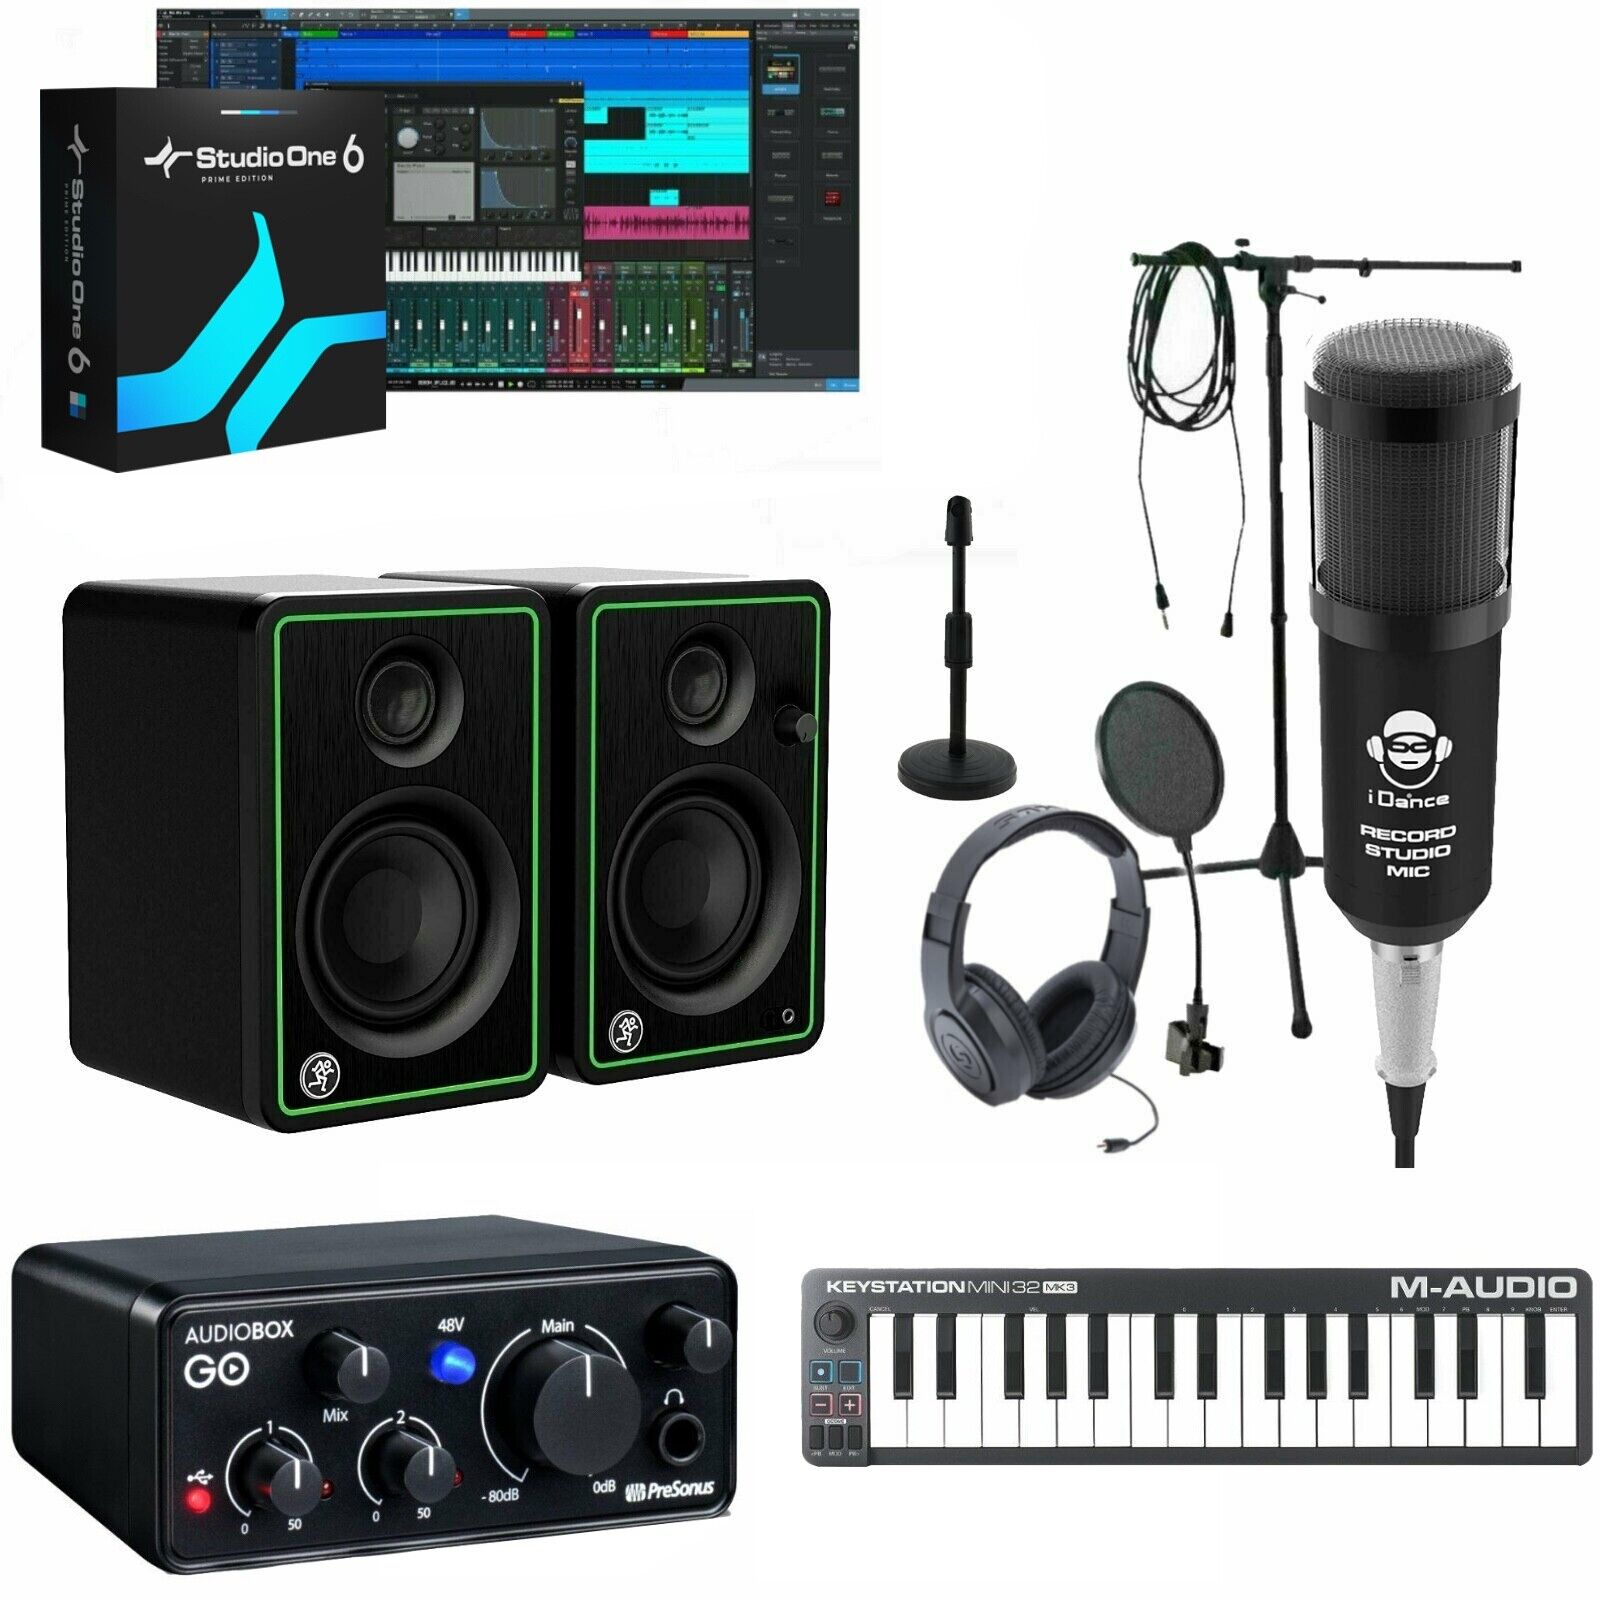 Home Recording Studio One Prime Bundle Package AudioBox GO Samson with Software